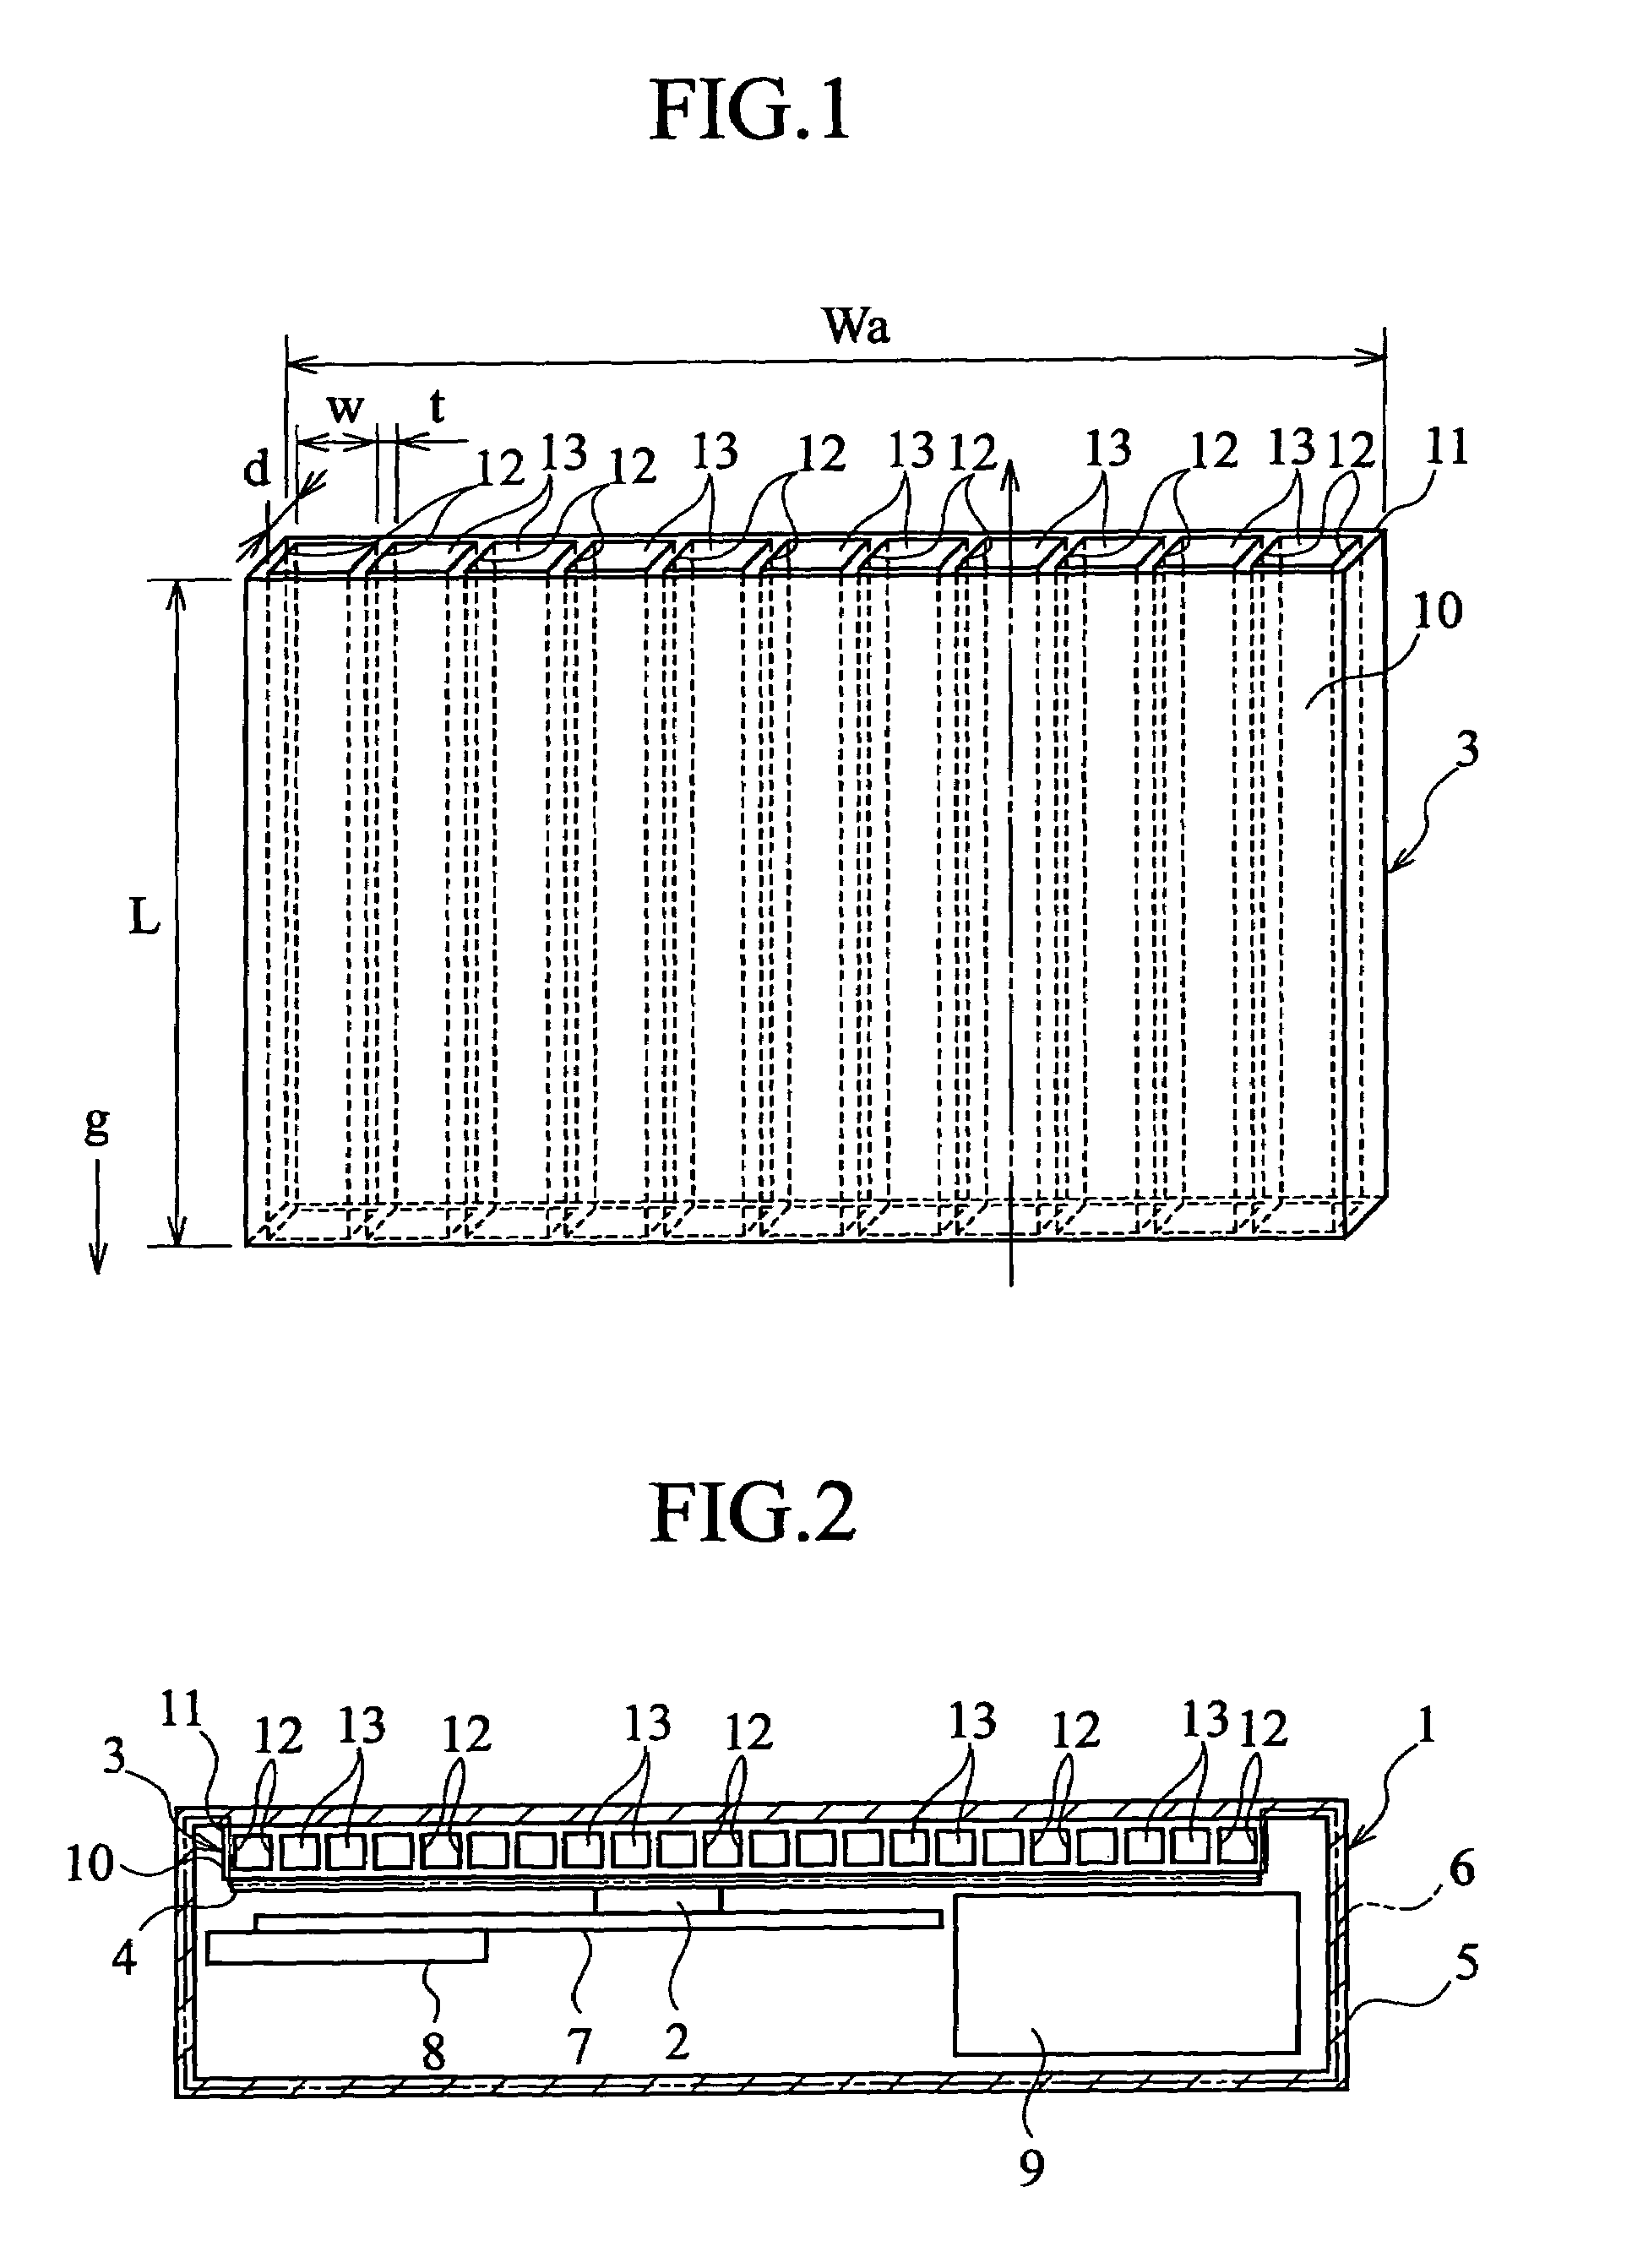 Heat dissipating structure for an electronic device